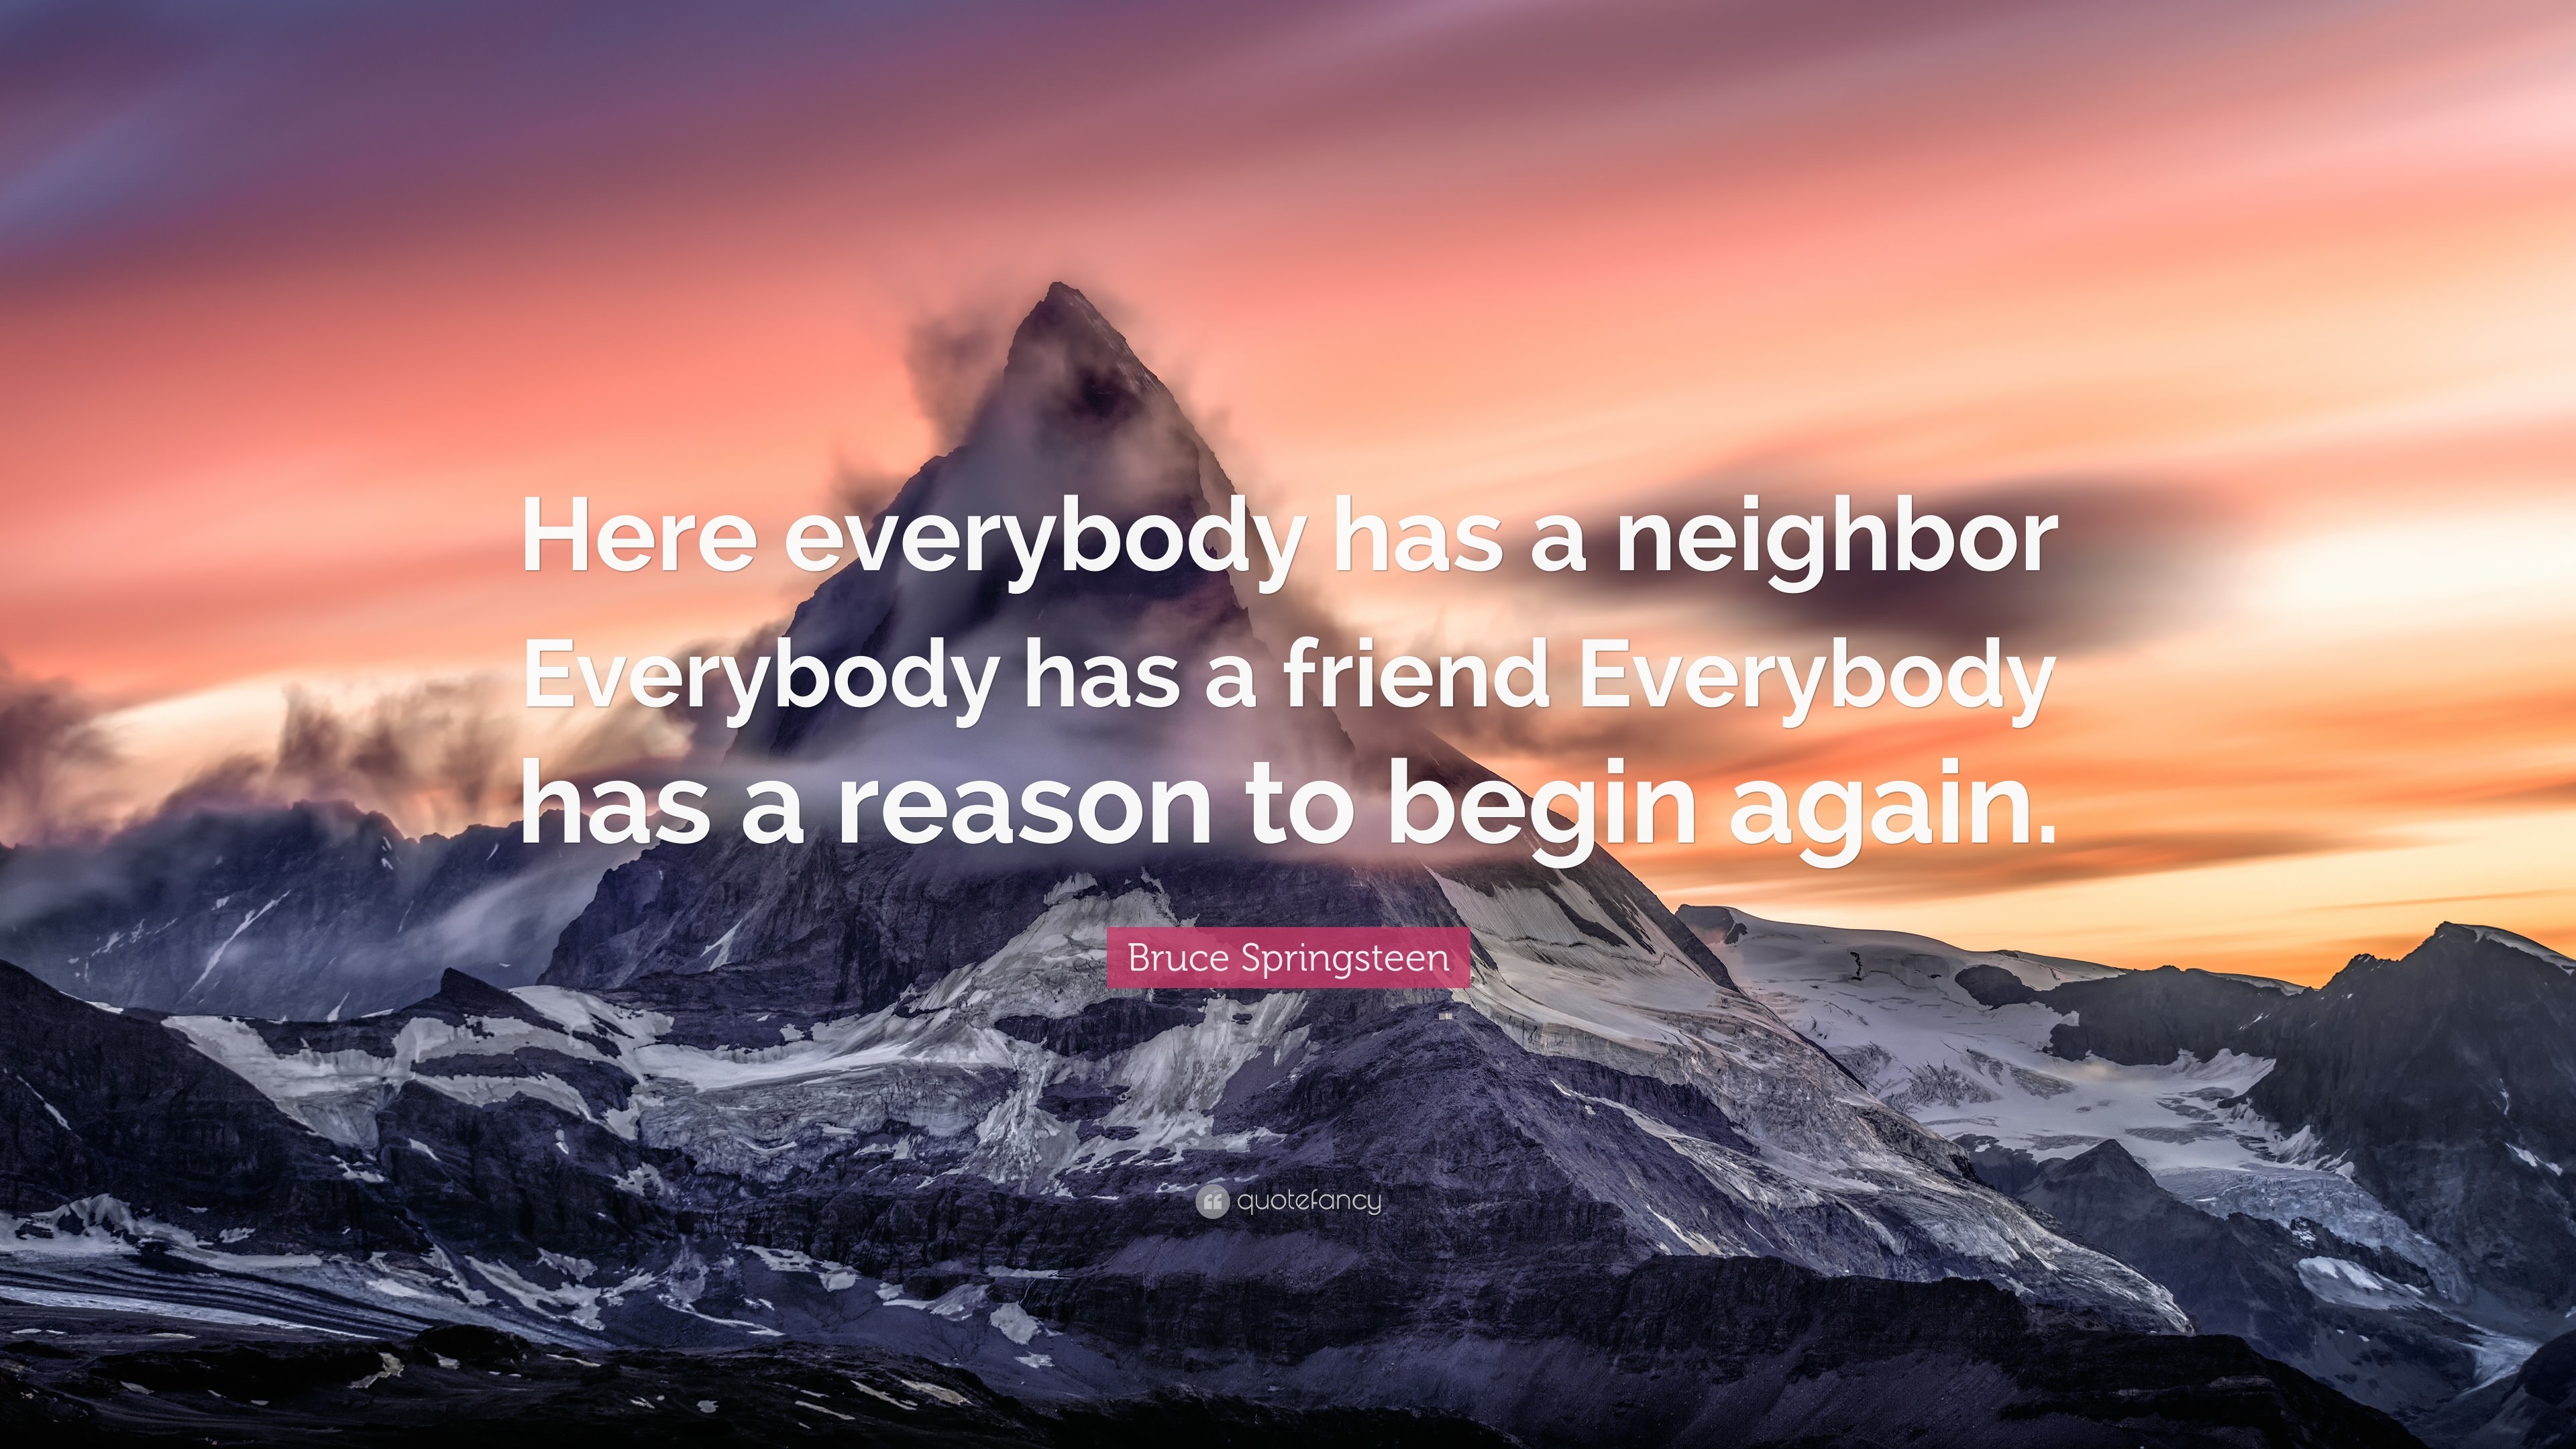 3840x2160 Bruce Springsteen Quote: “Here everybody has a neighbor Everybody has a  friend Everybody has